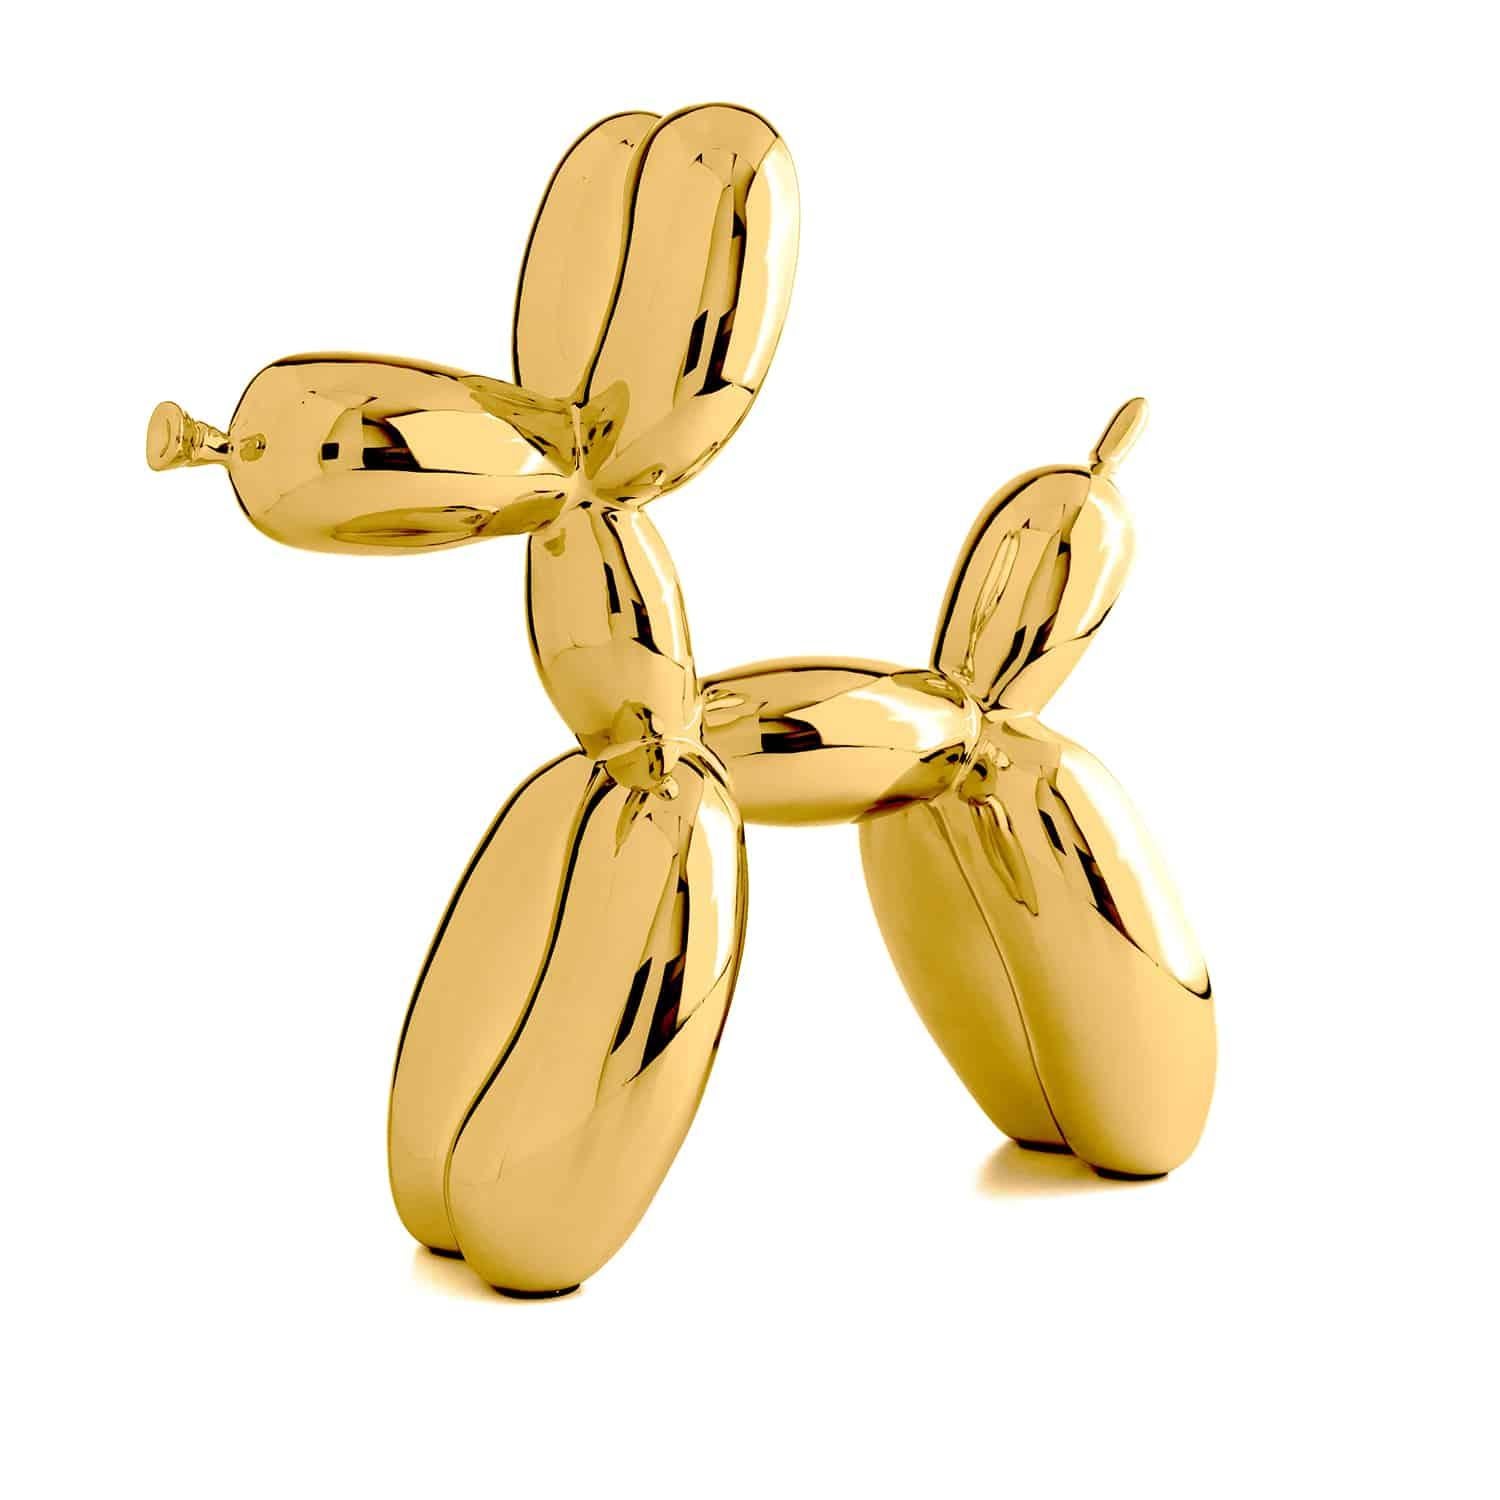 After Jeff Koons Figurative Sculpture - Balloon Dog ( After )  - Gold